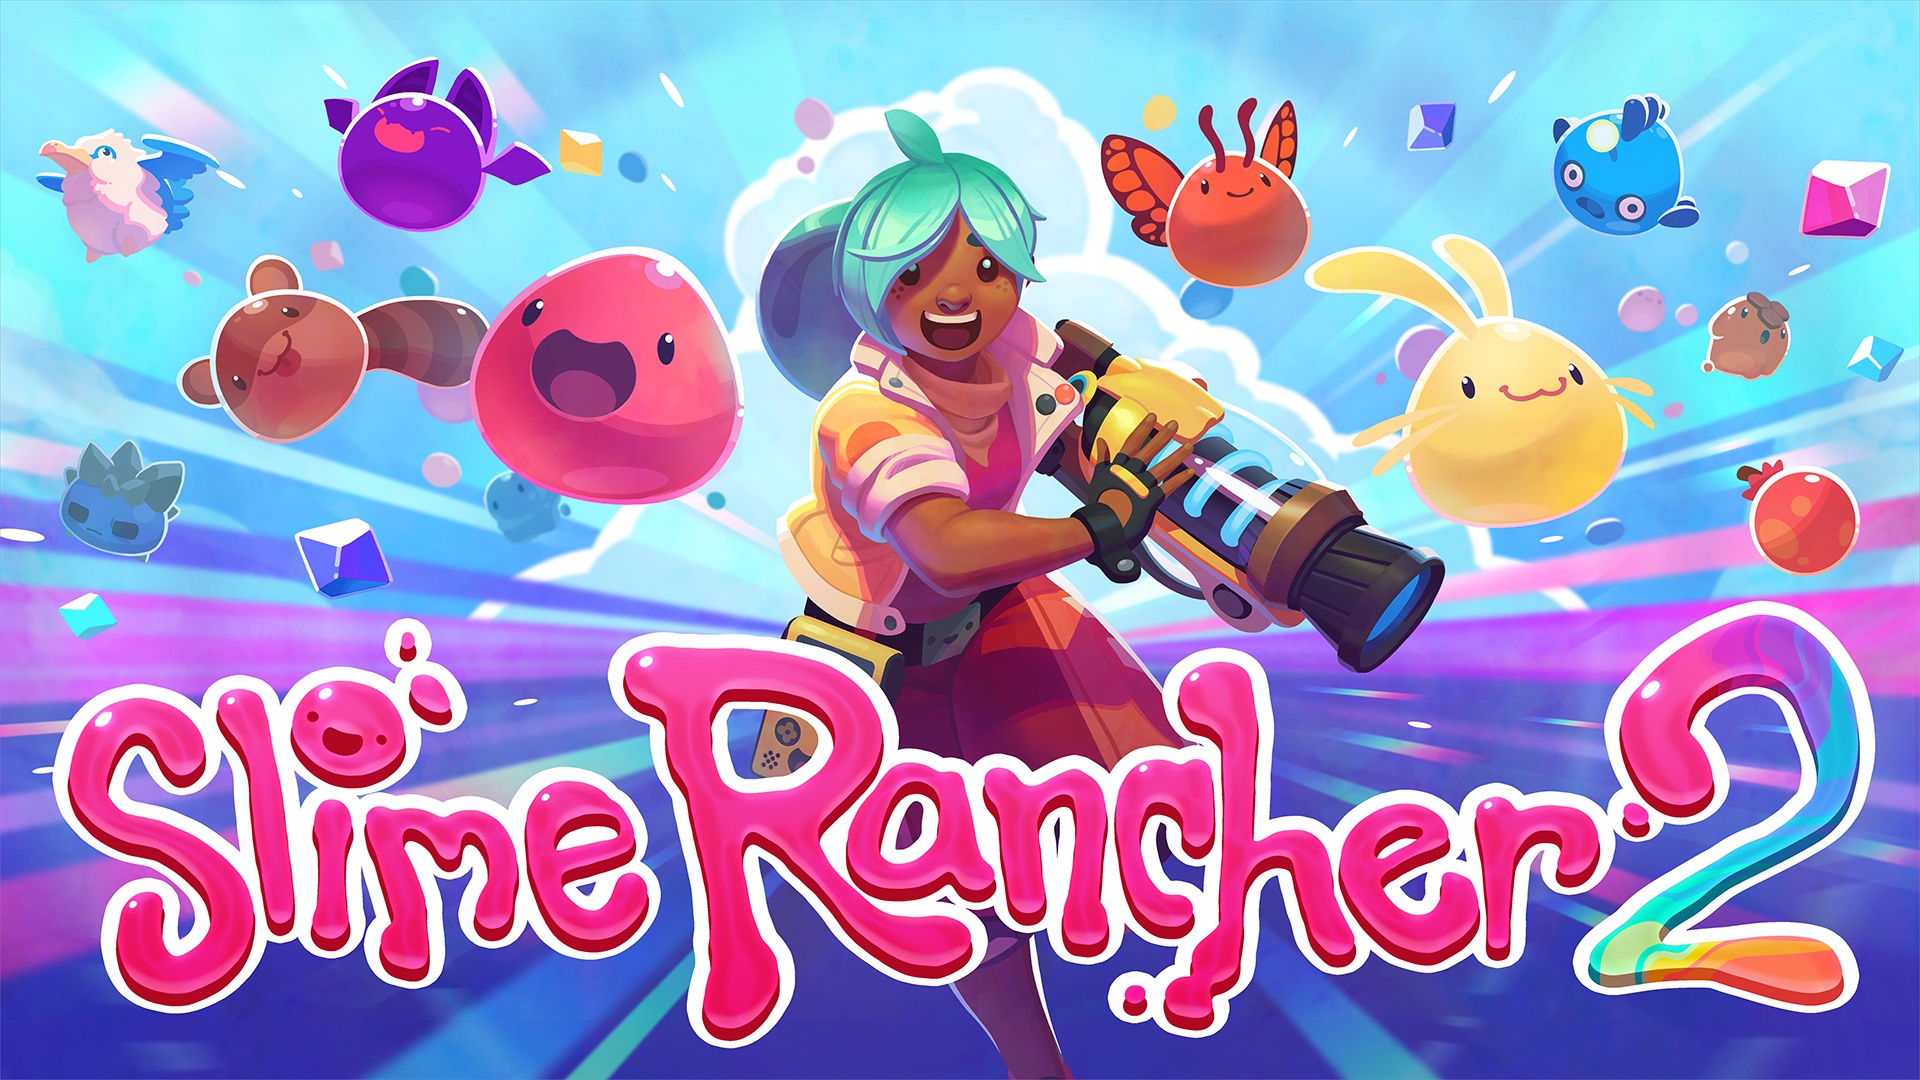 Video For Slime Rancher 2: Getting Creative with Your New Home on Rainbow Island